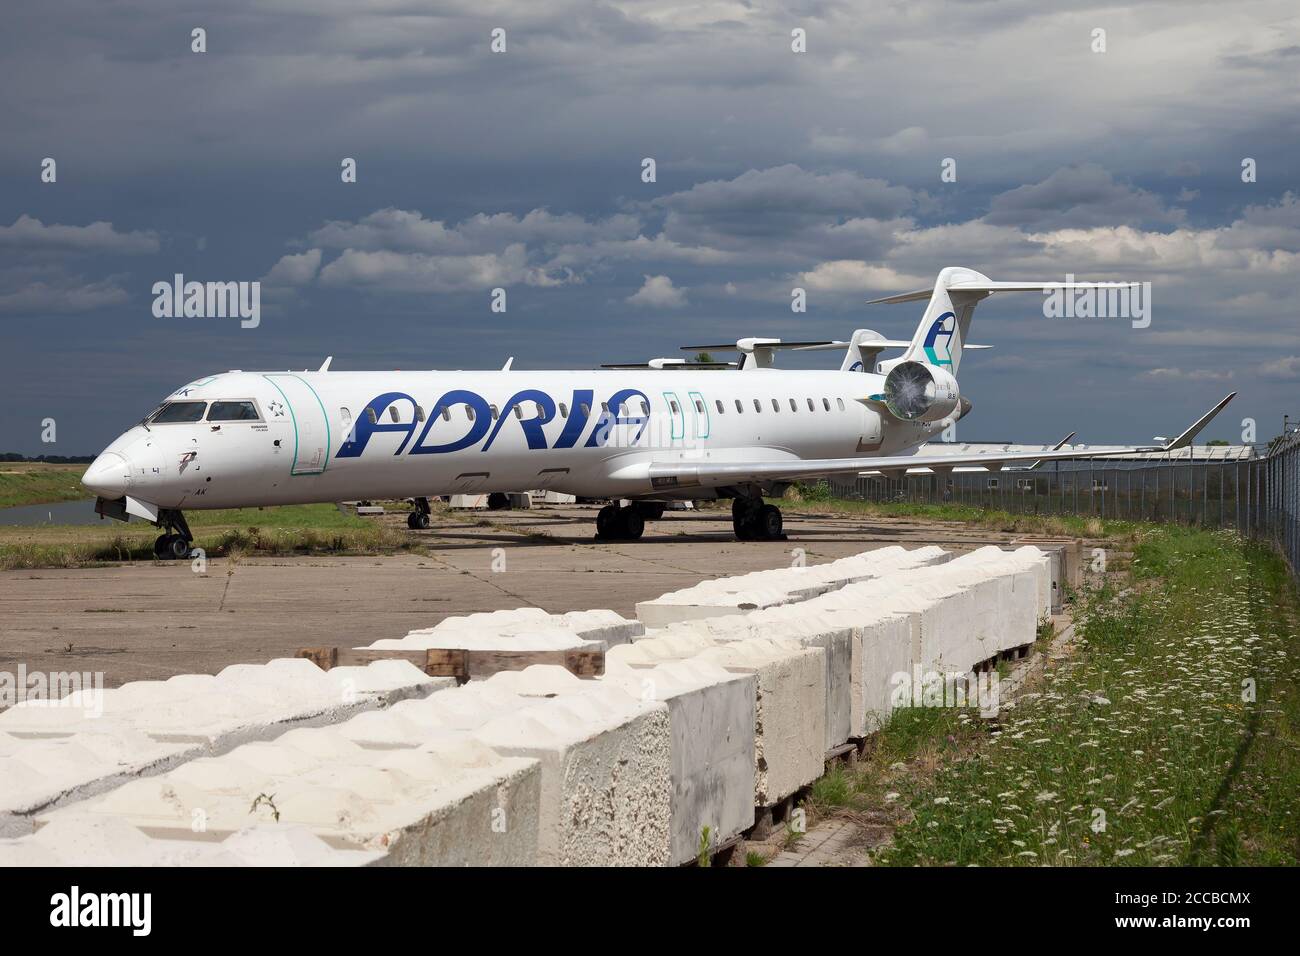 A Bombardier CRJ 900 previously belonged to Adria Airways now stored at  Maastricht-Aachen Airport. Stock Photo